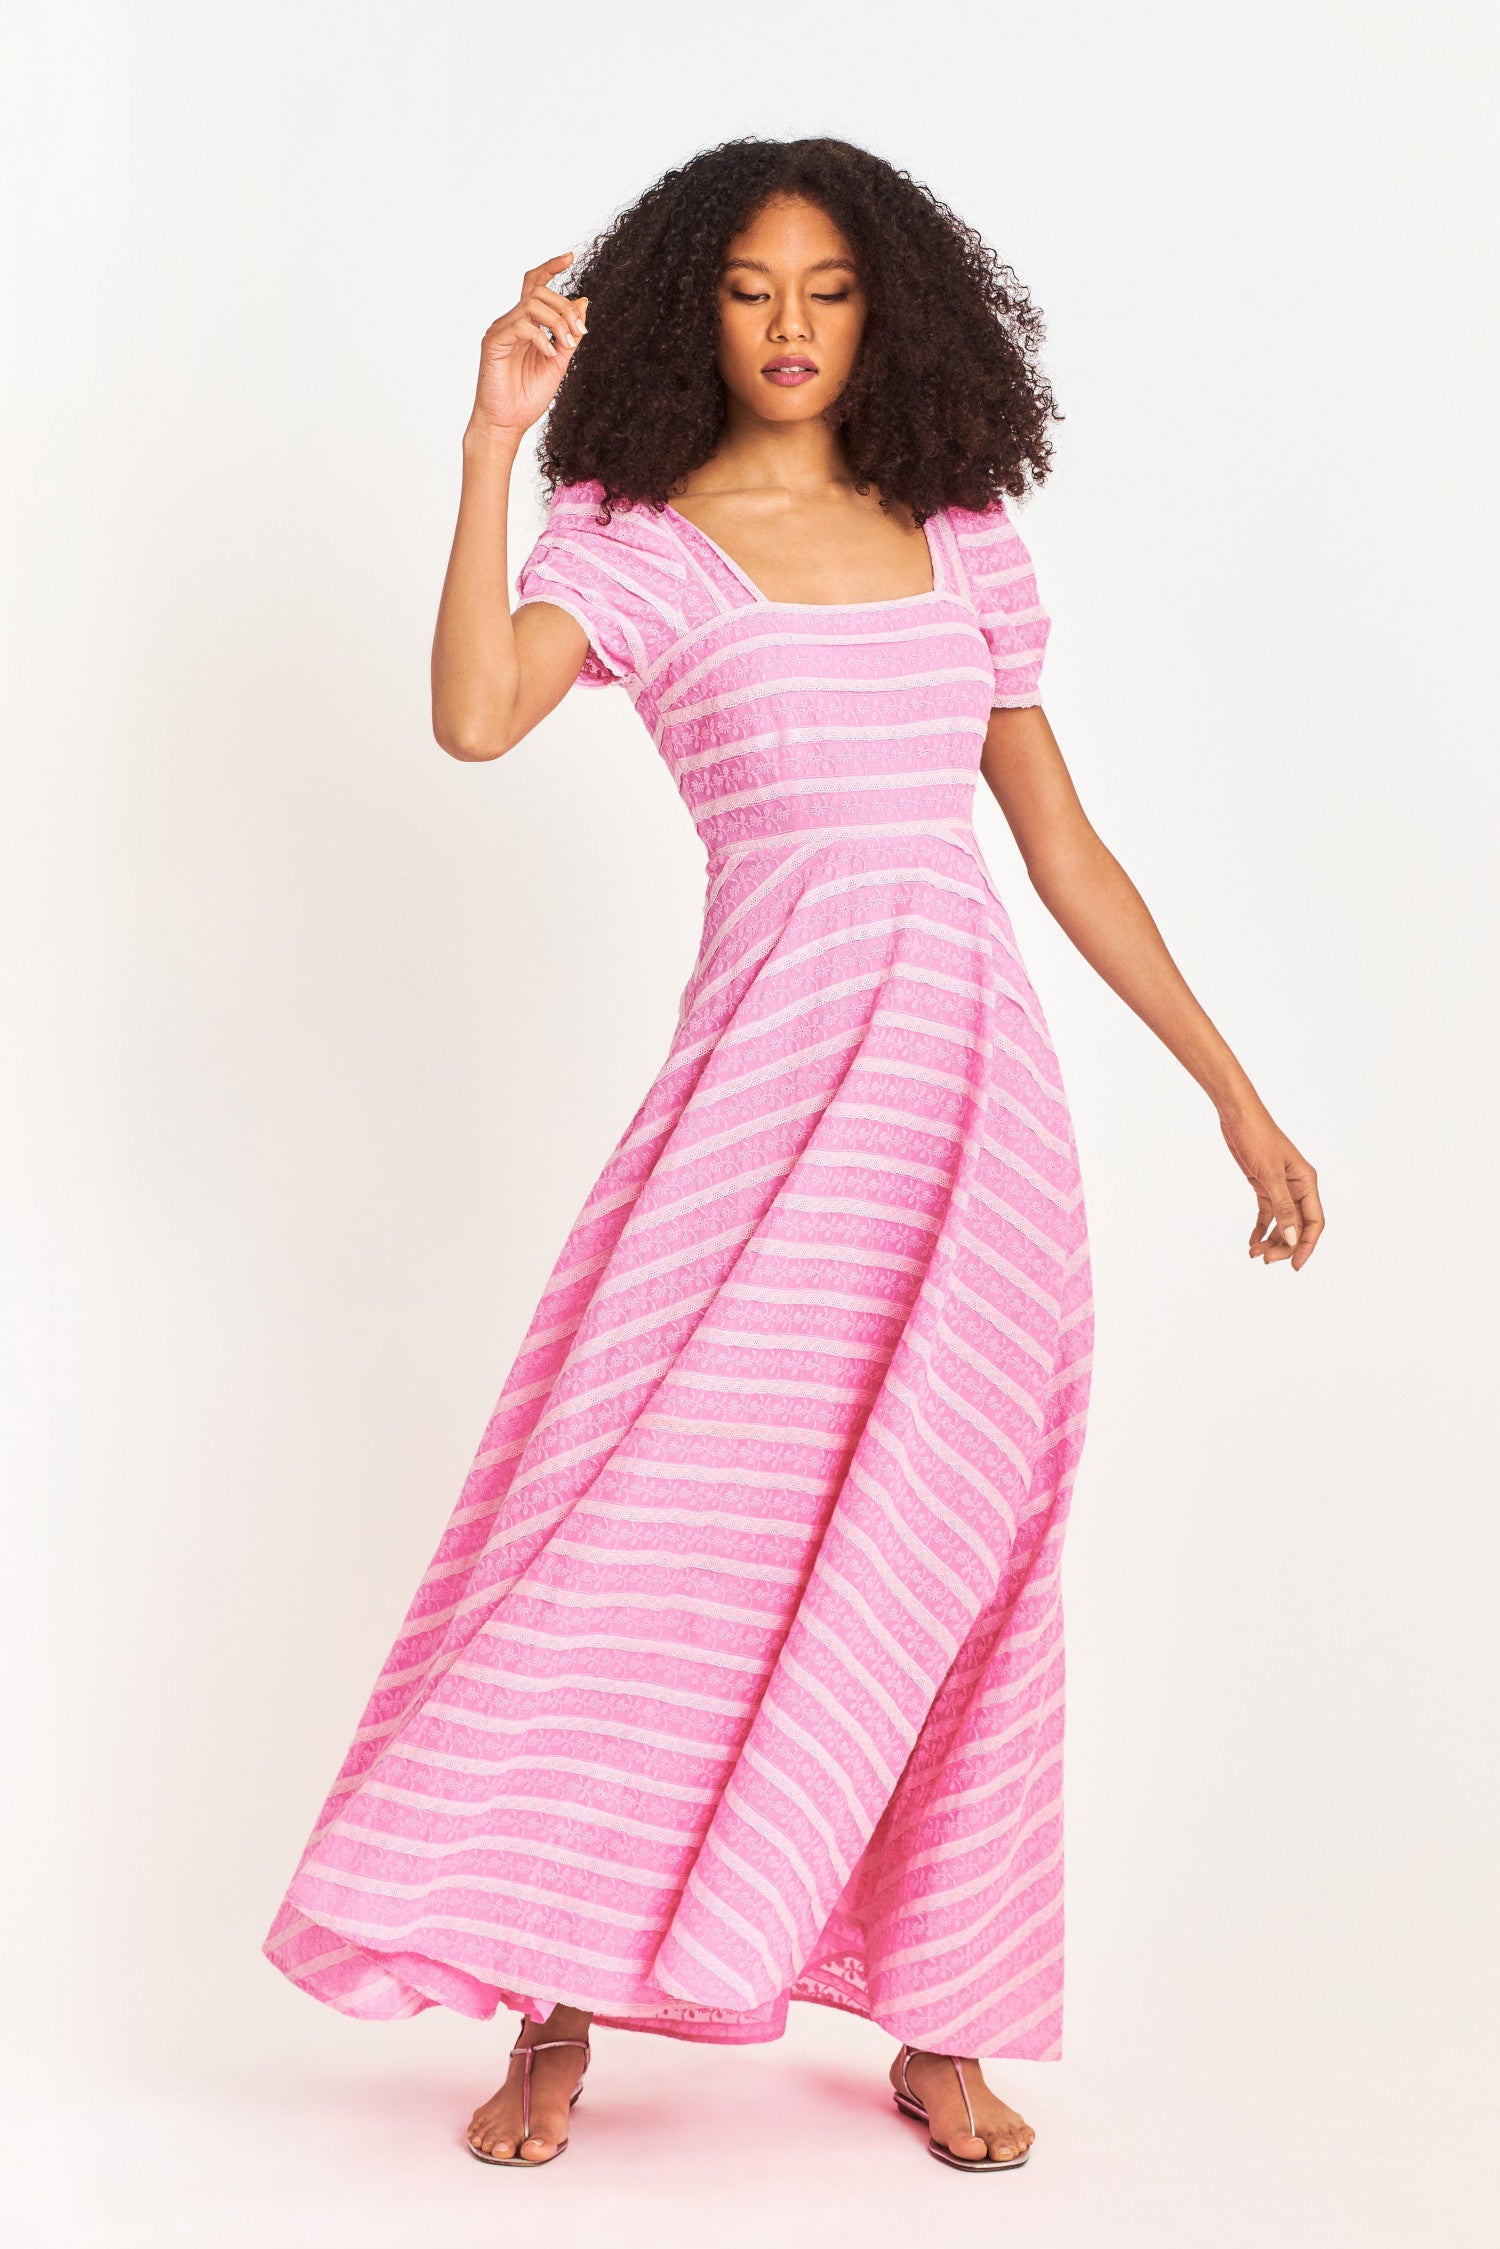 Pink floral lace maxi dress features a square lace neckline with a fitted bodice and short puff sleeves